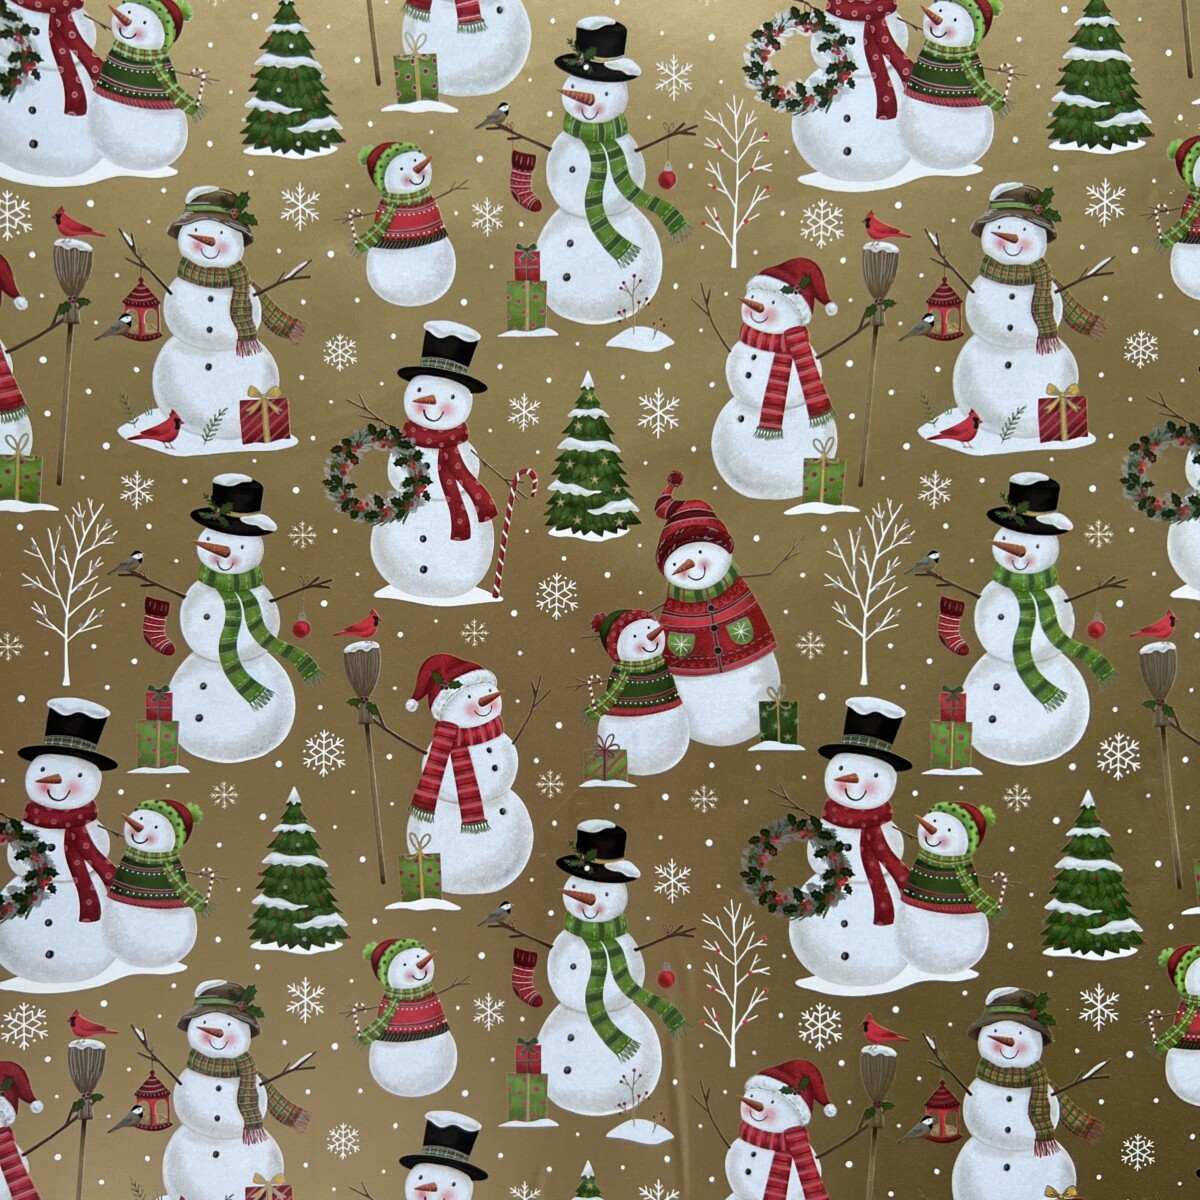 Snowman Holiday Wrapping Paper